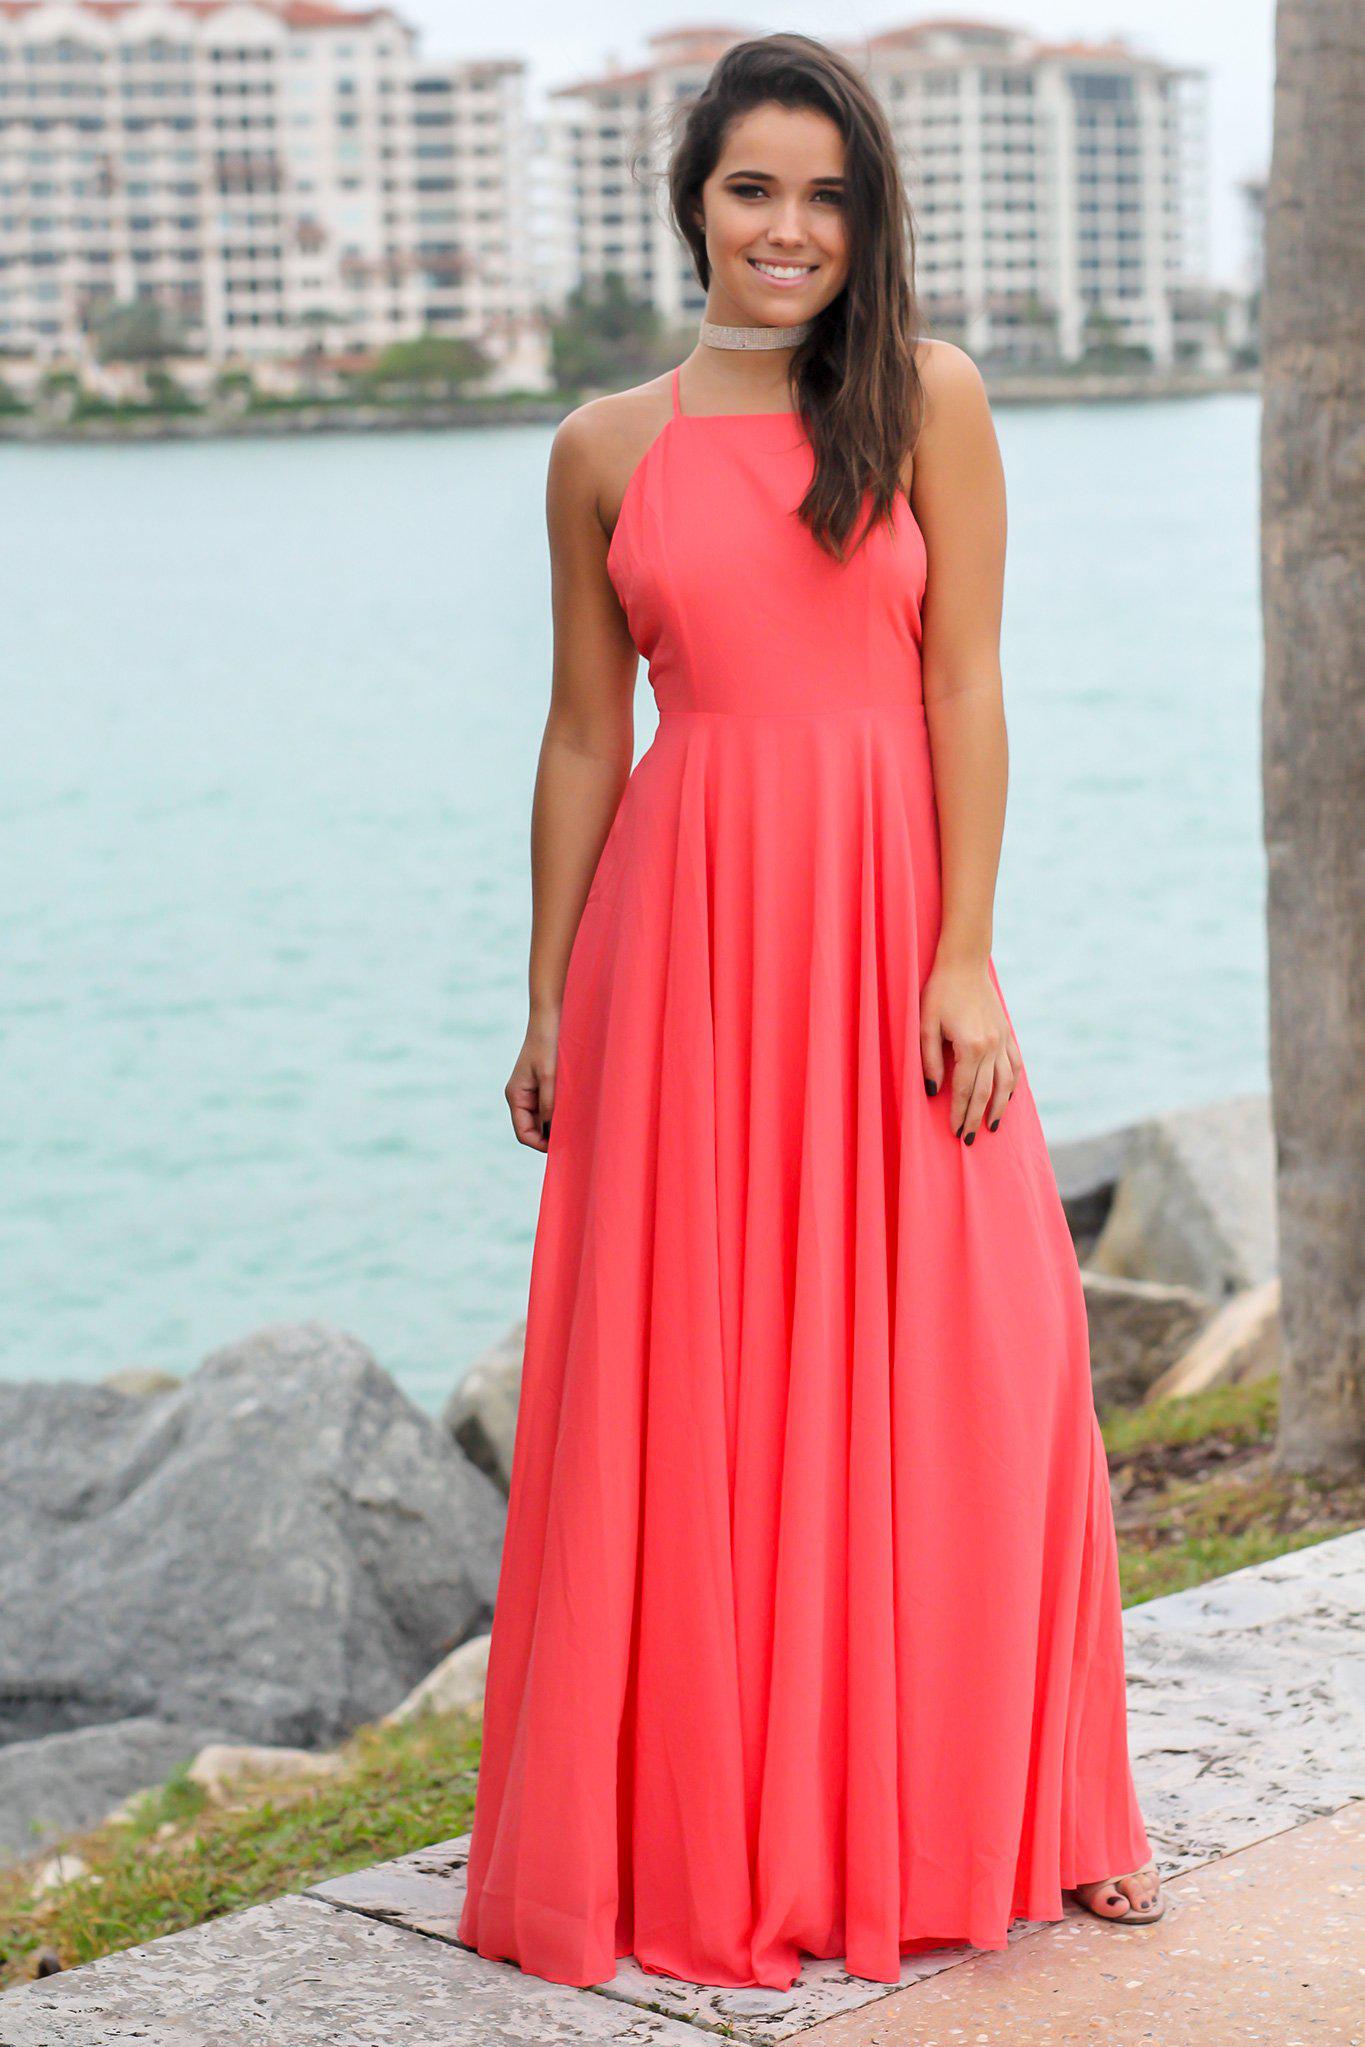 Cute Coral Dresses Top Sellers, UP TO 57% OFF | www.editorialelpirata.com